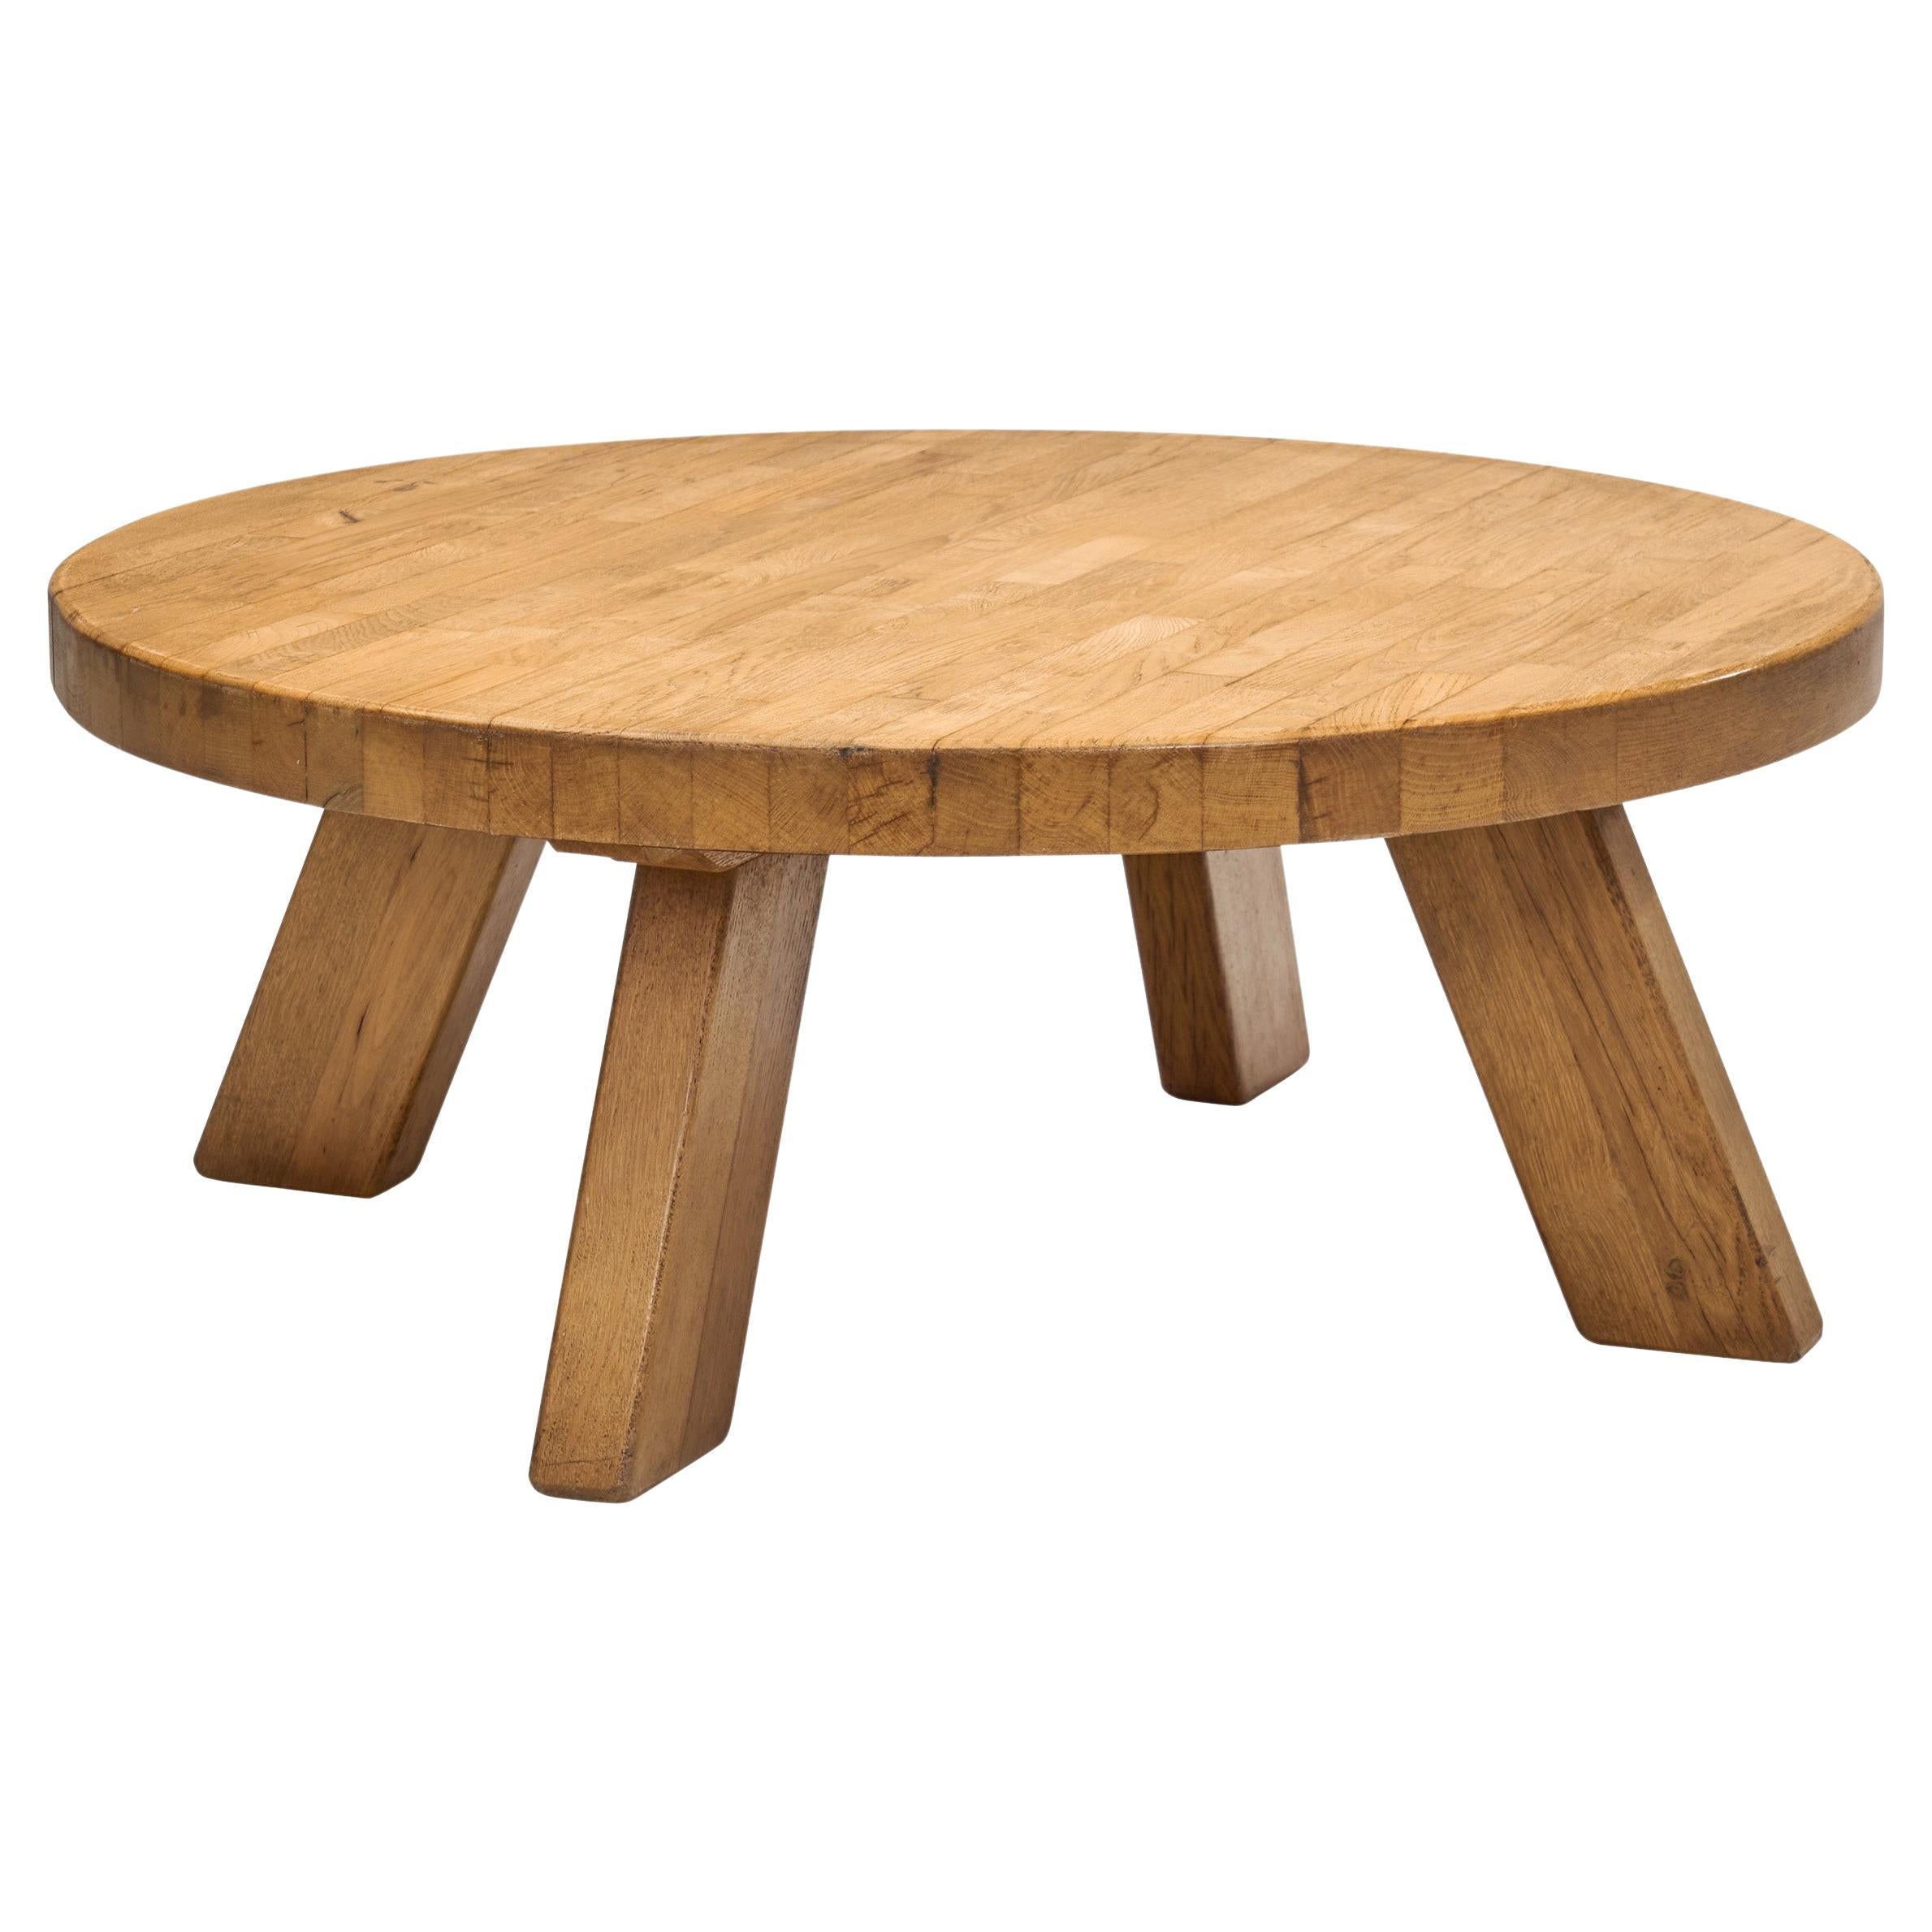 Solid Oak Round Brutalist Coffee Table, The Netherlands 1970s For Sale